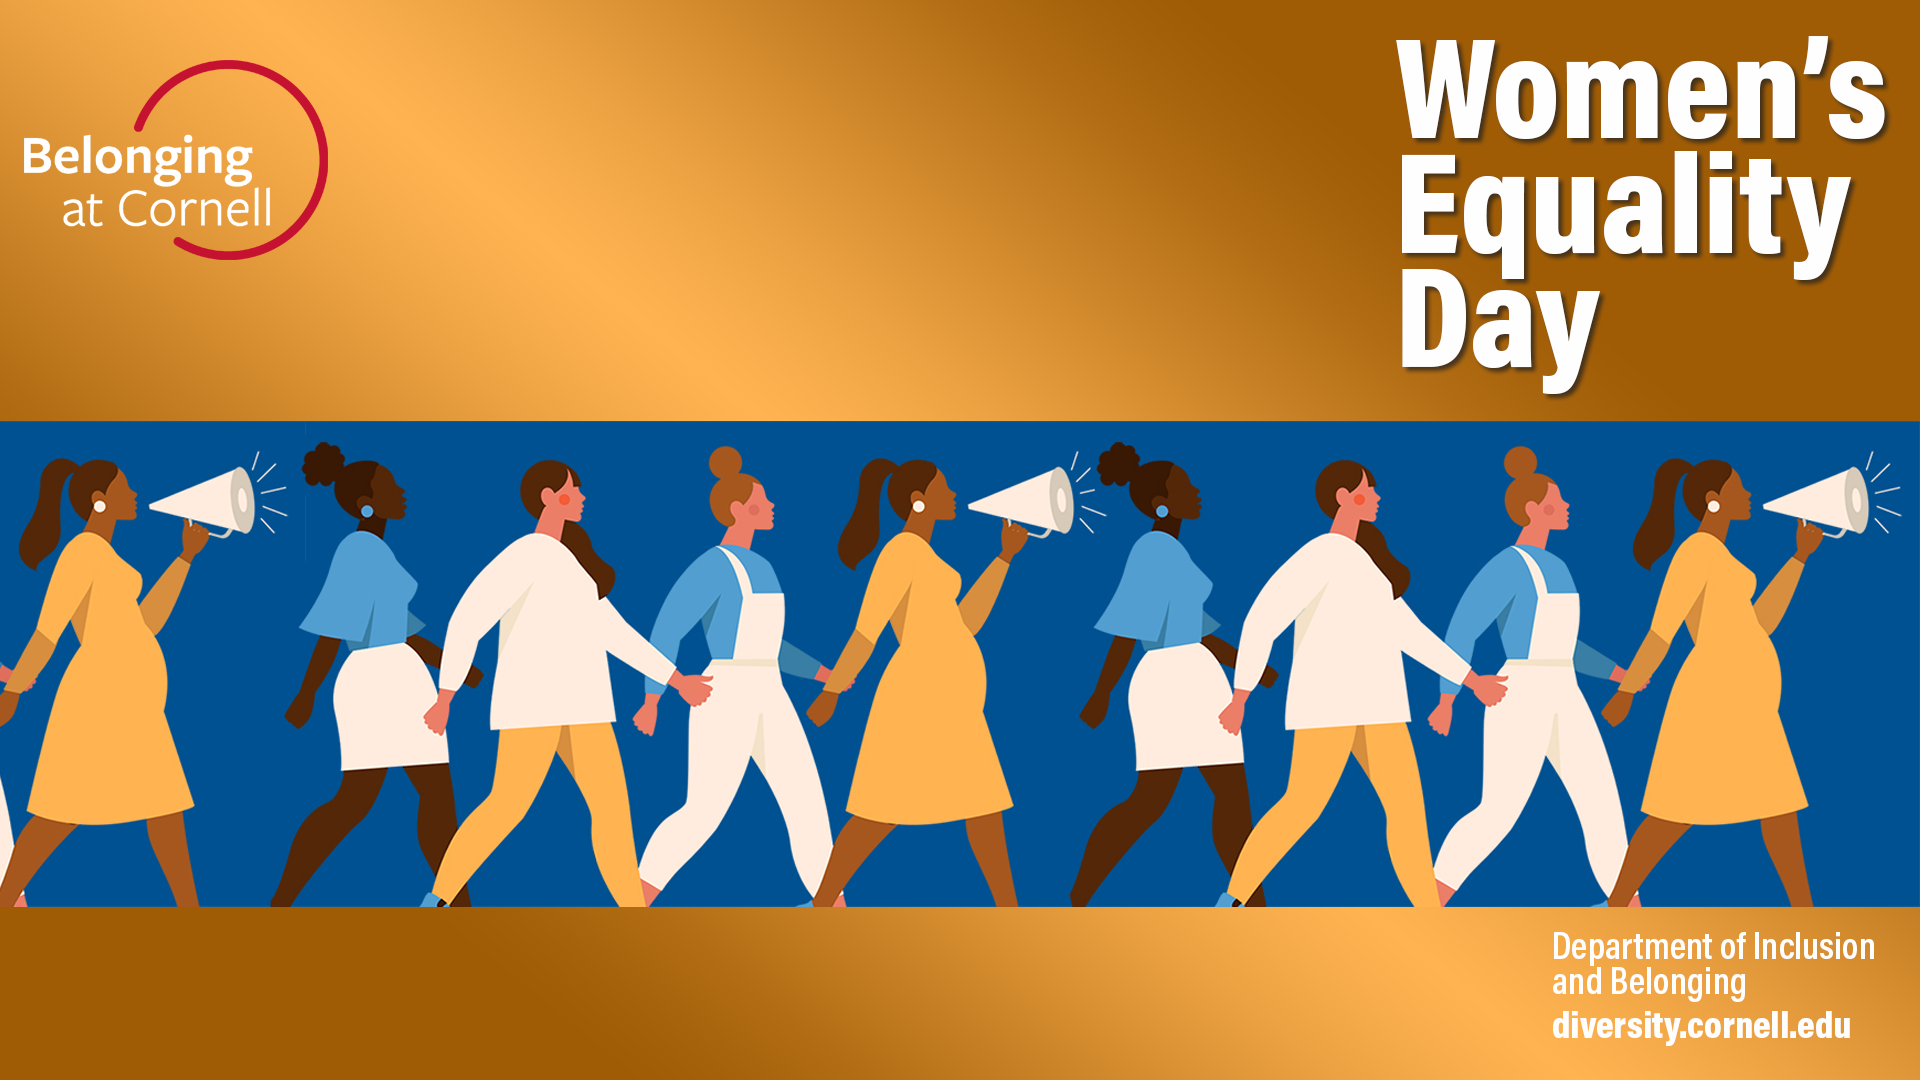 Zoom background in honor of Women's Equality Day